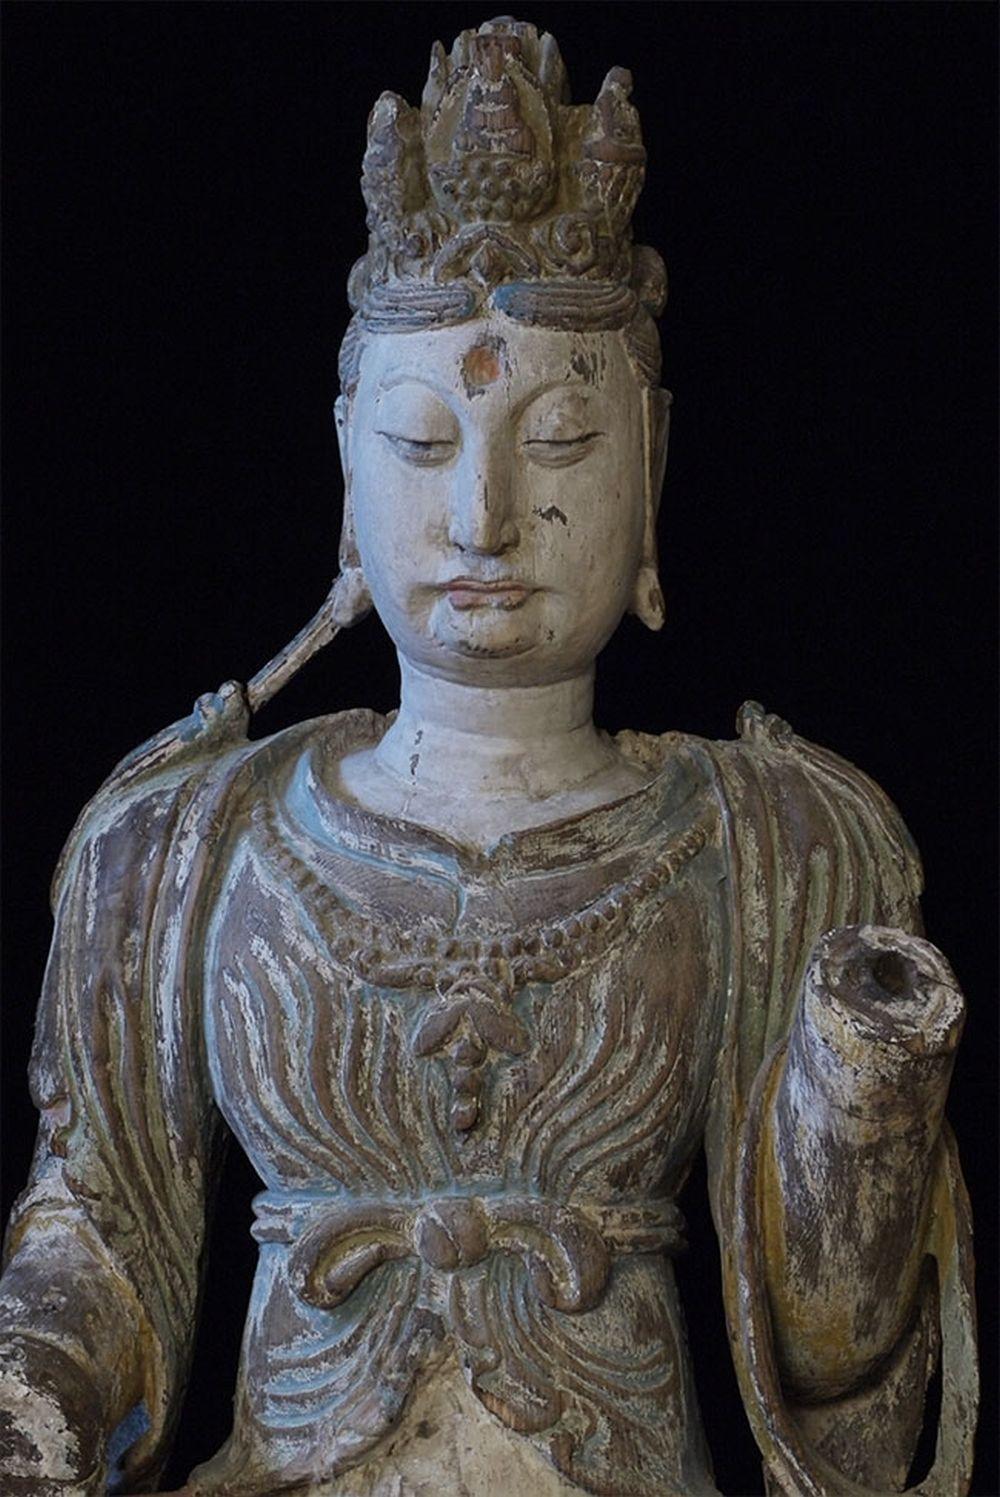 A large Ming-style sculpture of Chinese Bodhisattva Guanyin, circa 1900s, from a century-old US collection. Dated circa 1900s based on the face (bulbous eyes and parrot nose), style of the robes (especially the distinctive cinched rippled robes at